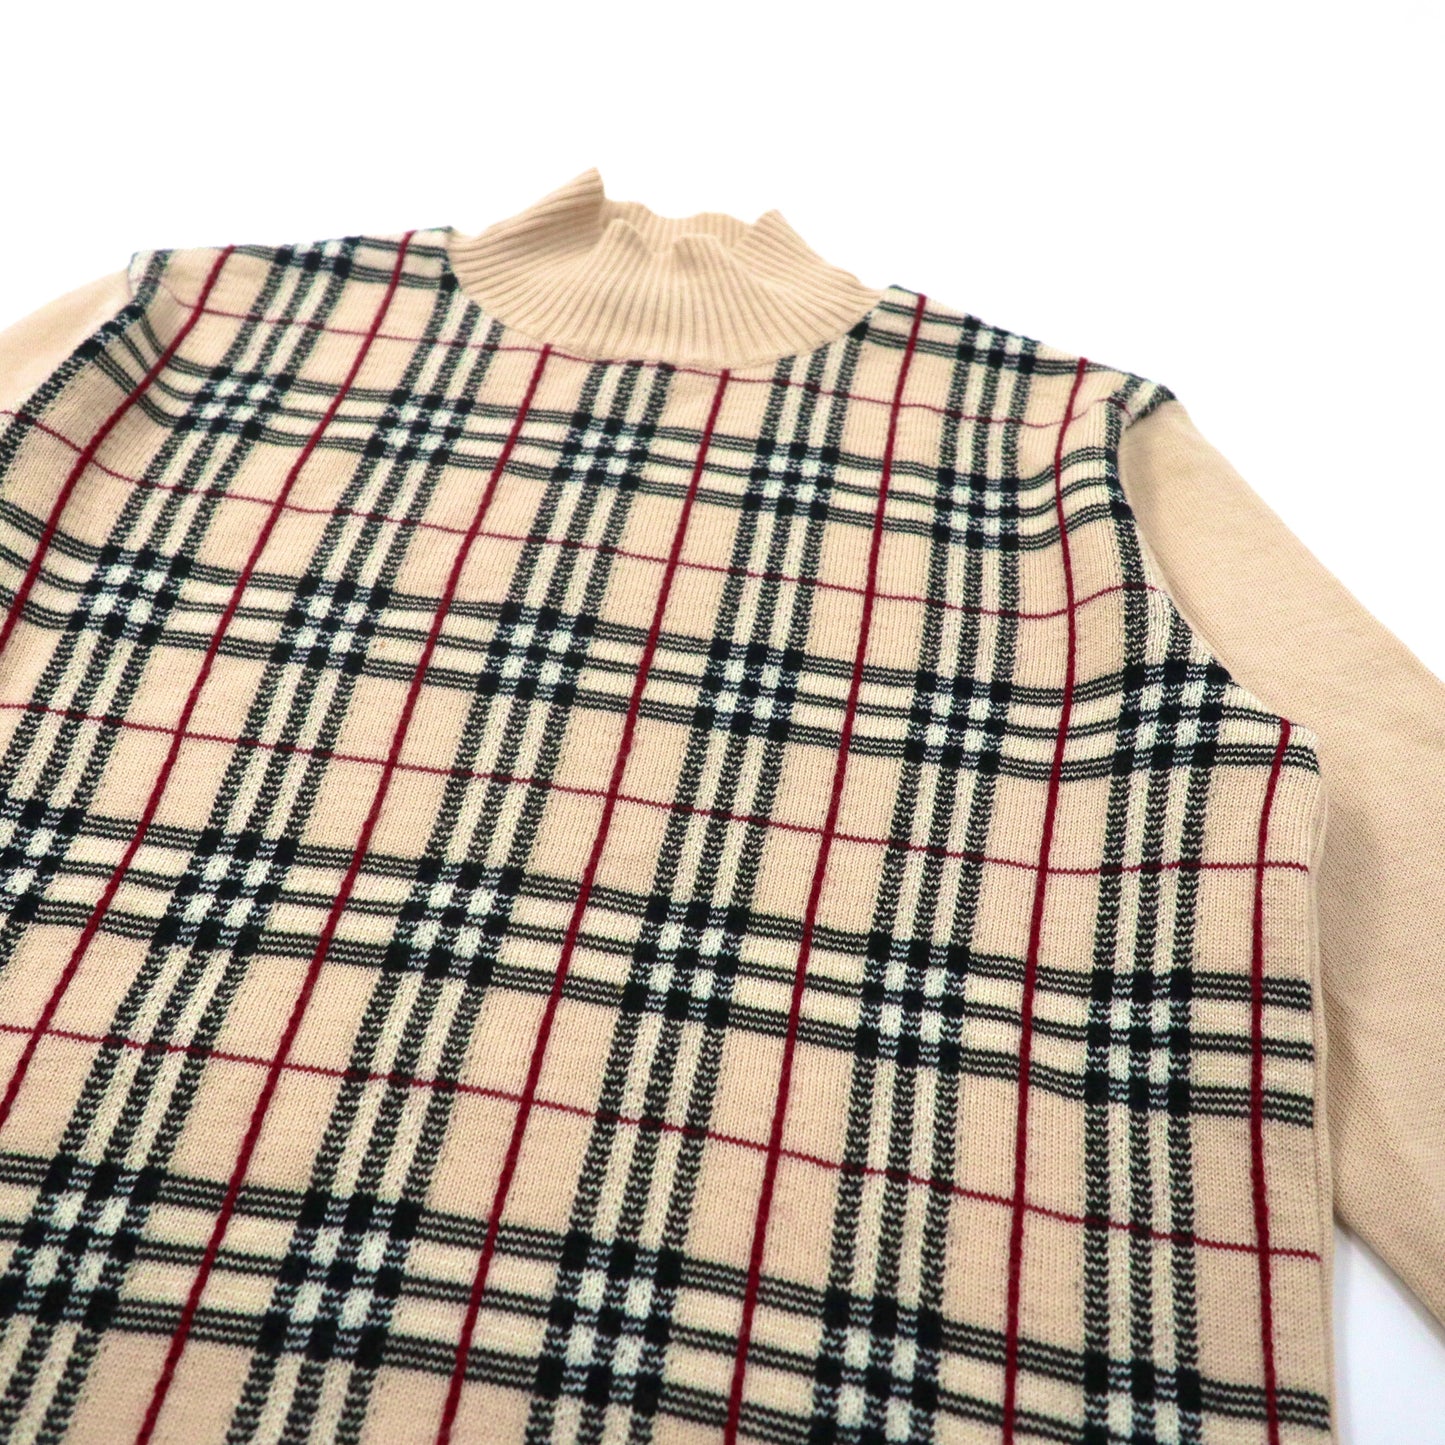 BURBERRY High Neck Knit Sweater M Beige CHECKED Wool Cashmere 